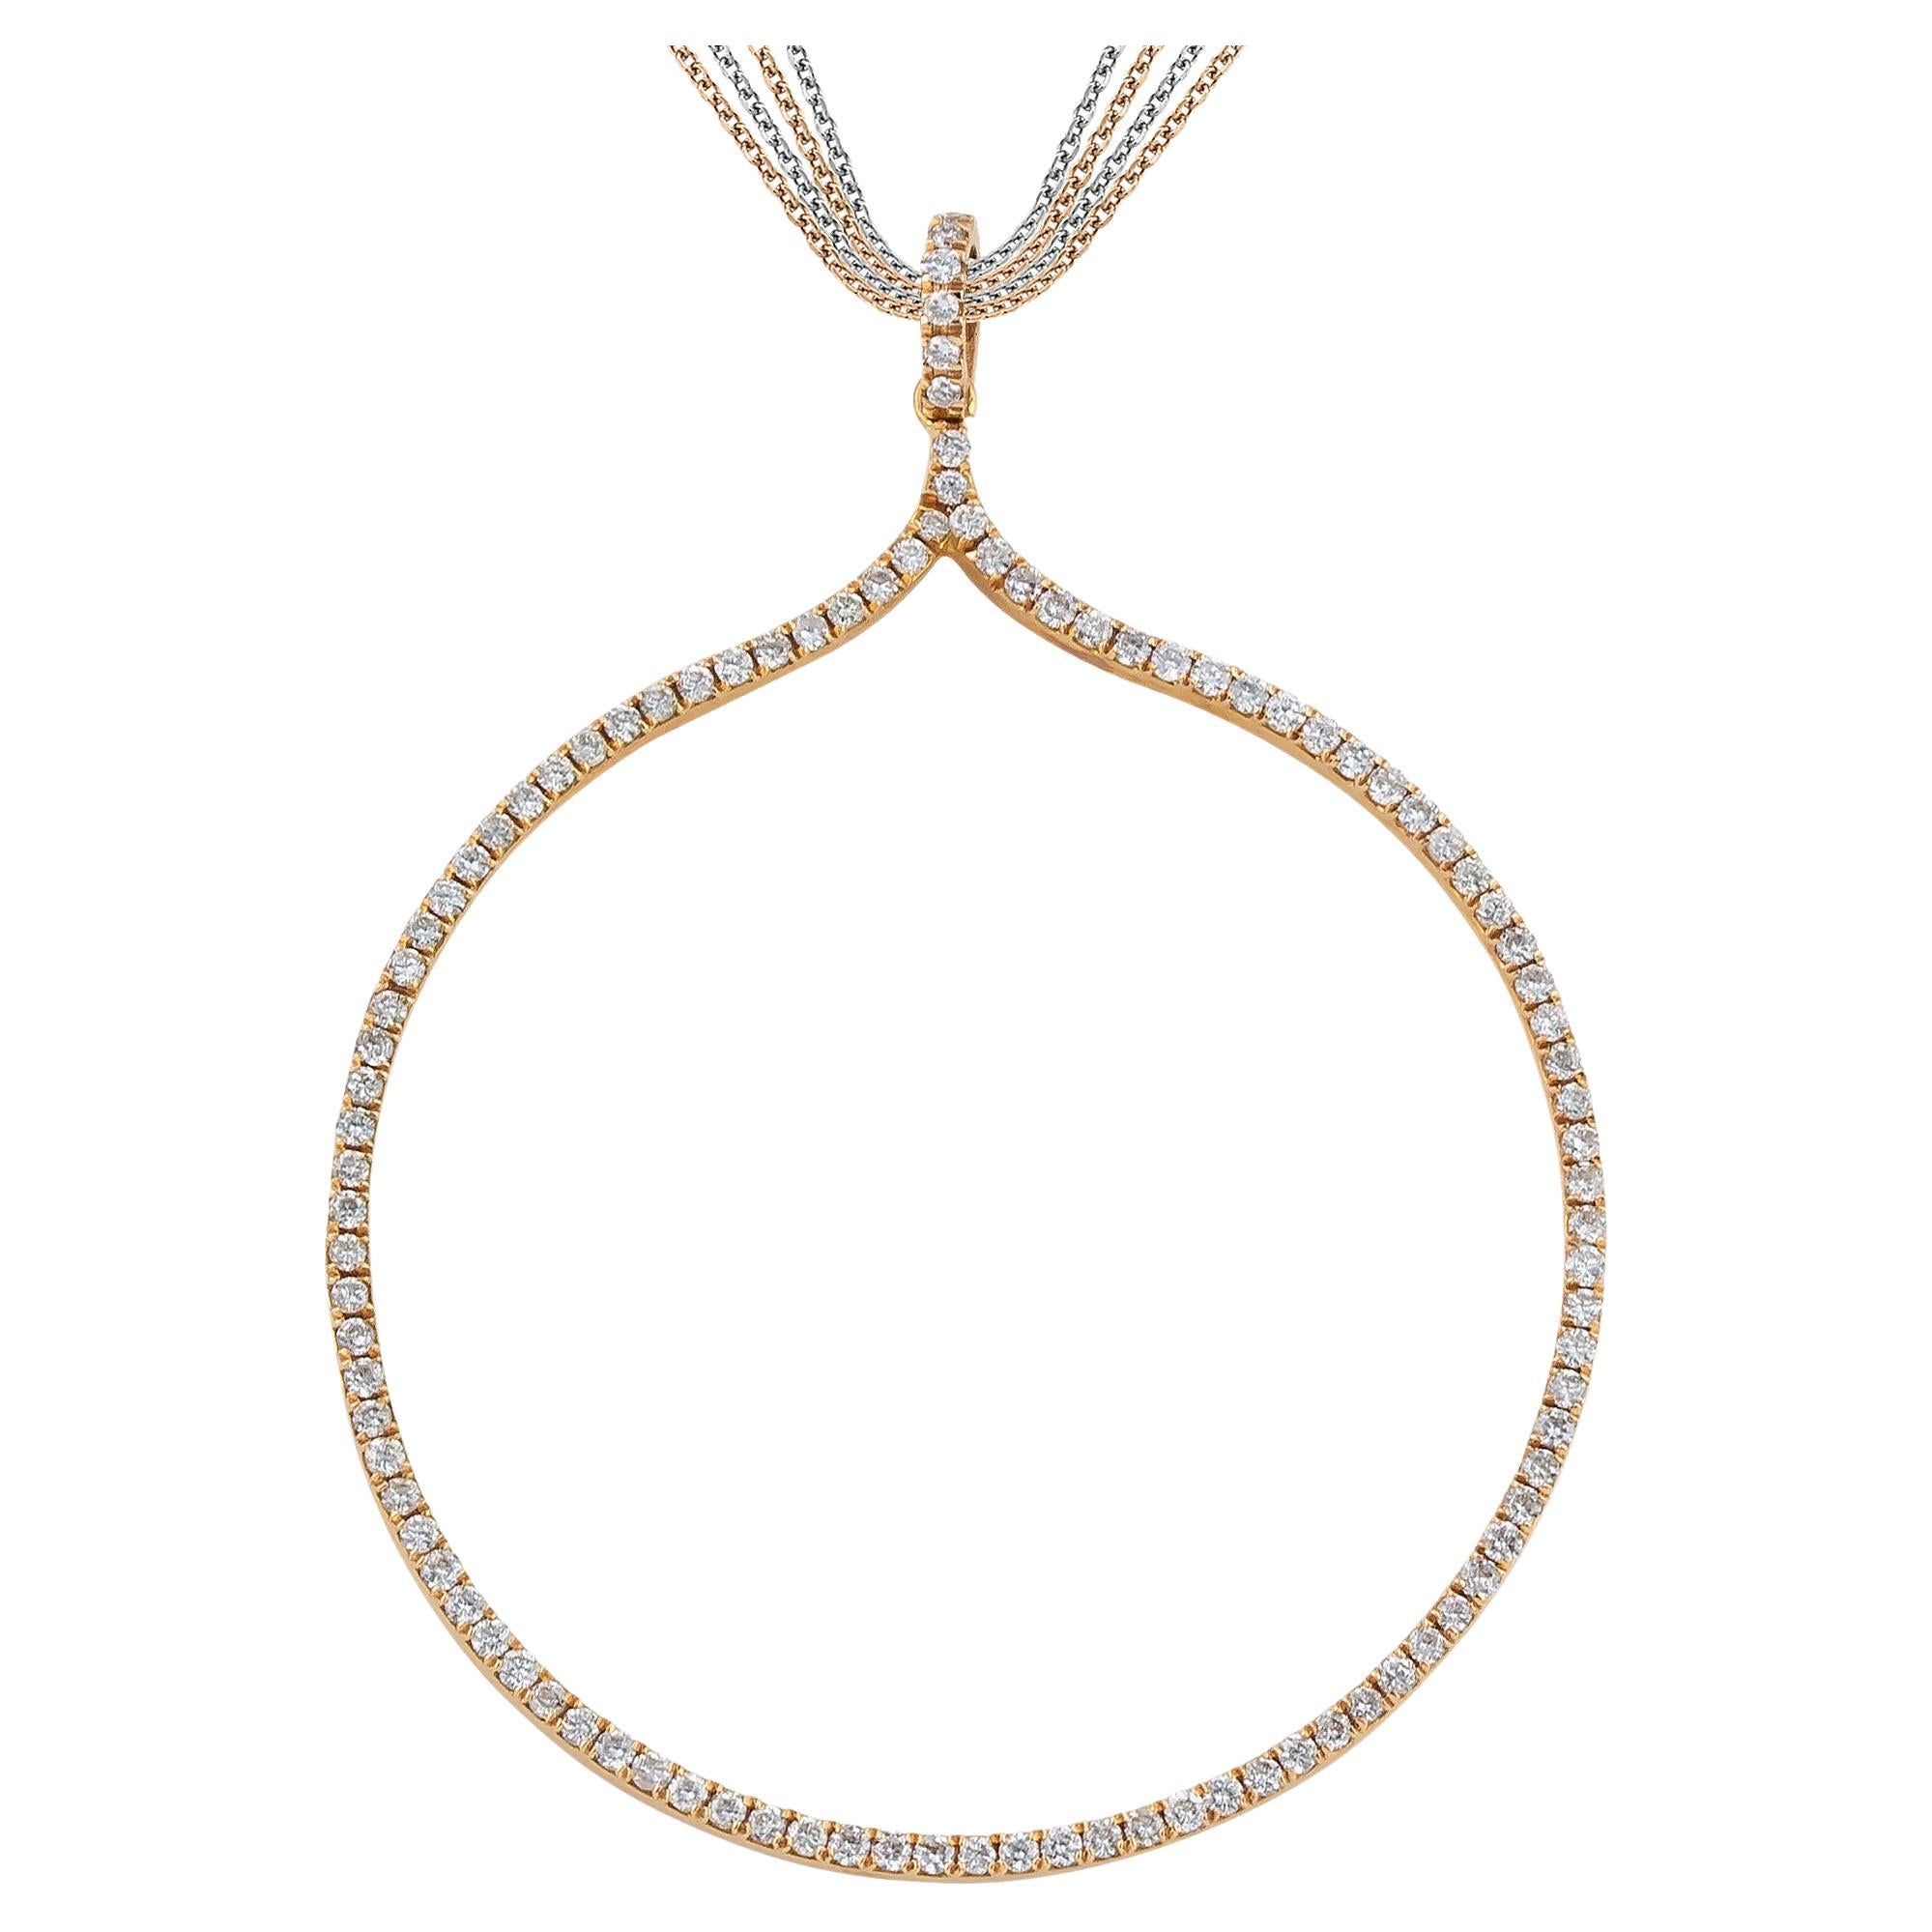 Round Hoop Diamond Pendant Necklace in 18kt Rose Gold with Multi Chain Necklace